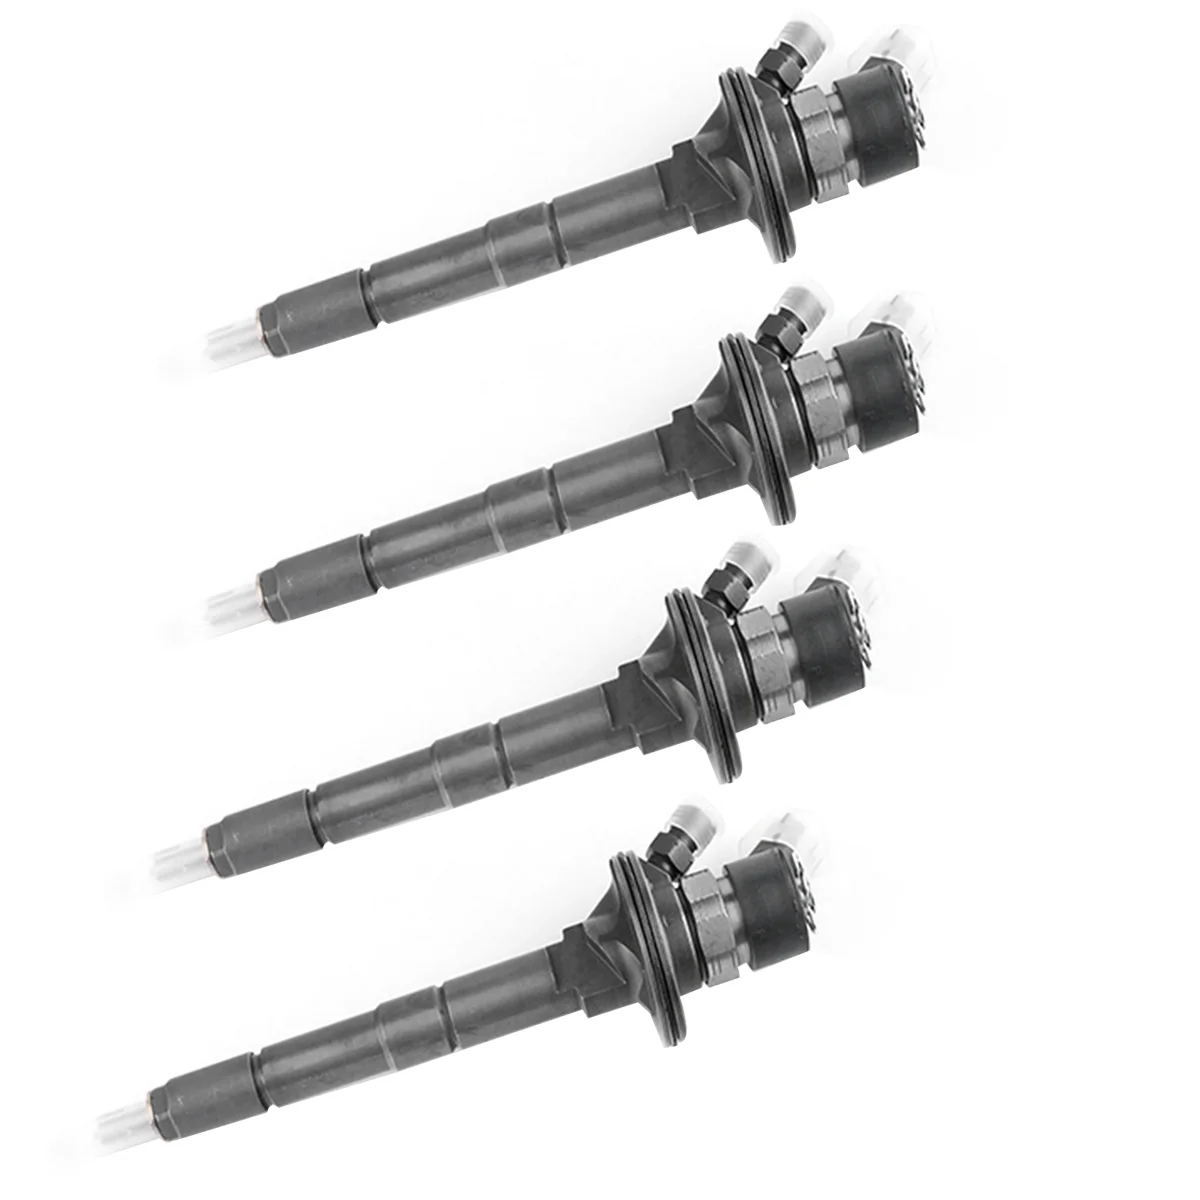 

4Pcs 0445110284 Diesel Common Rail Injector for Nissan Primastar Cabstar Master Dongfeng ZD30 Pickup Truck Fuel Injector